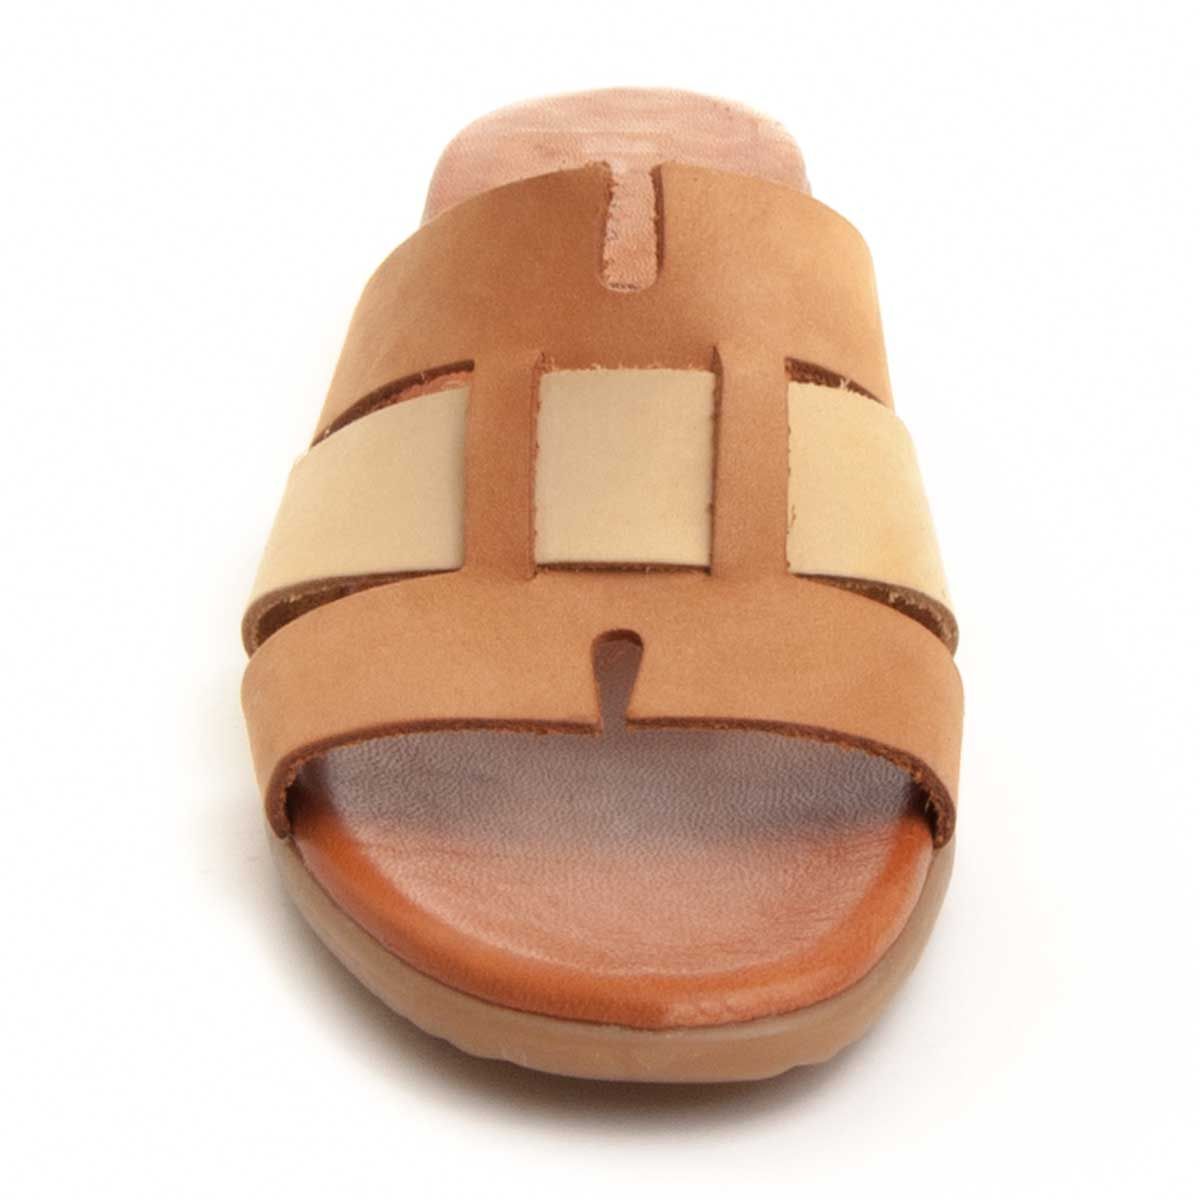 Only three centimeters of wide heel, for a well-comfortable style sandal. Comfort before all. The flexible rubber sole is non-slip. As for comfort we want to highlight the gel plant that provides a trace effect when walking. In addition the gel, unlike the foam, for a long time does not end up deforming. Fully manufactured in Chrome VI natural skin. Made in Spain. Low carbon footprint. Breathable, comfortable, soft and with 10 years warranty PURAPIELl. We emphasize the softness of the leather.